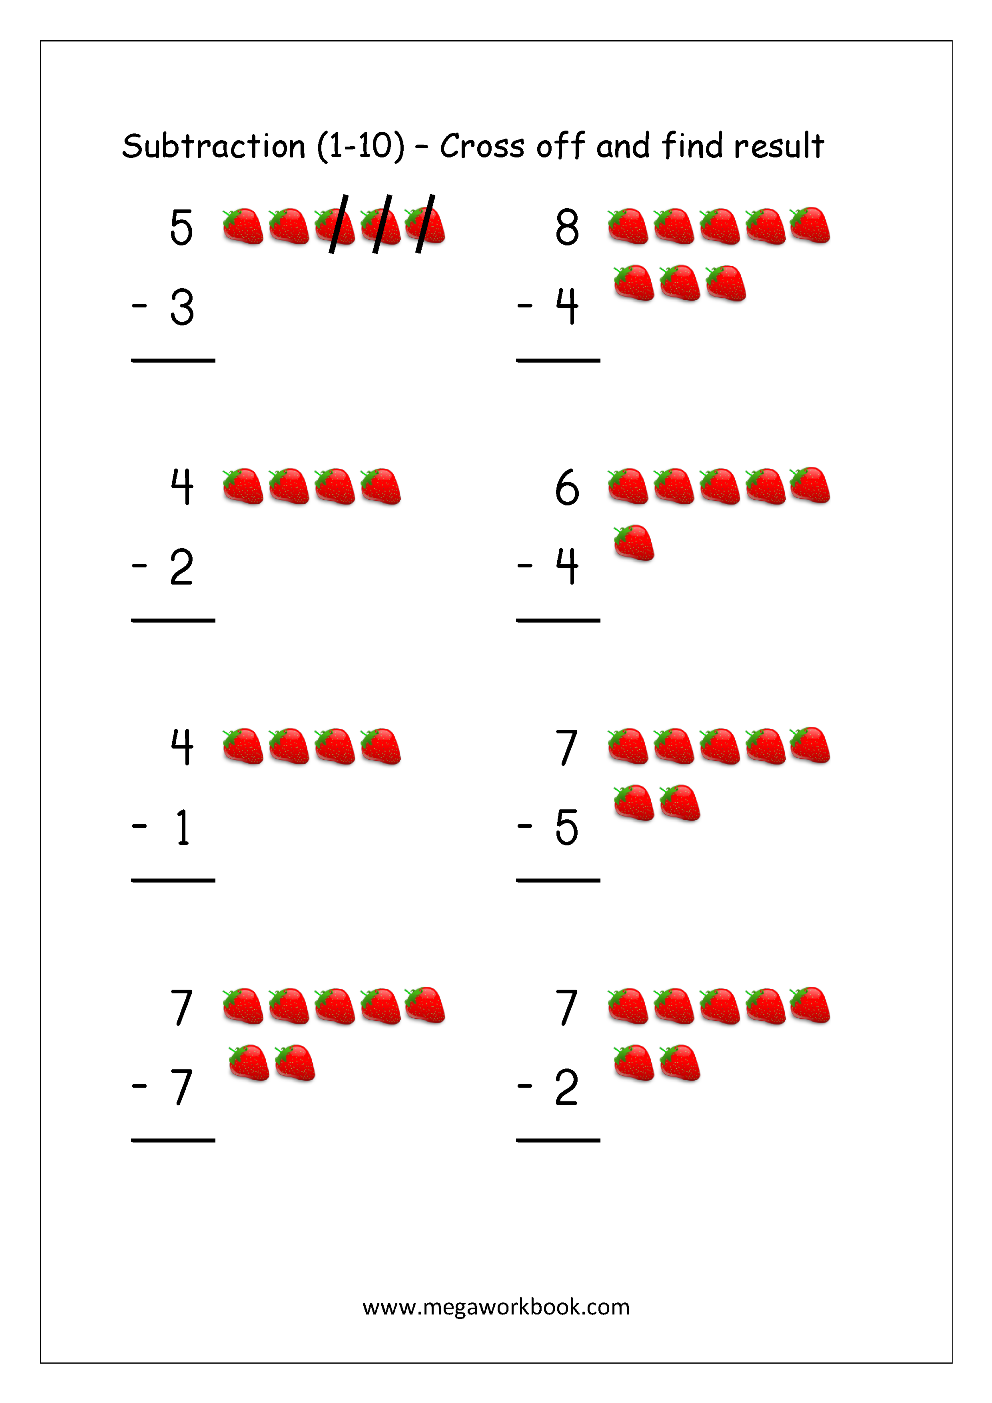 free printable number subtraction 1 10 worksheets for grade 1 and kindergarten subtraction with pictures objects to cross out subtraction using number line megaworkbook